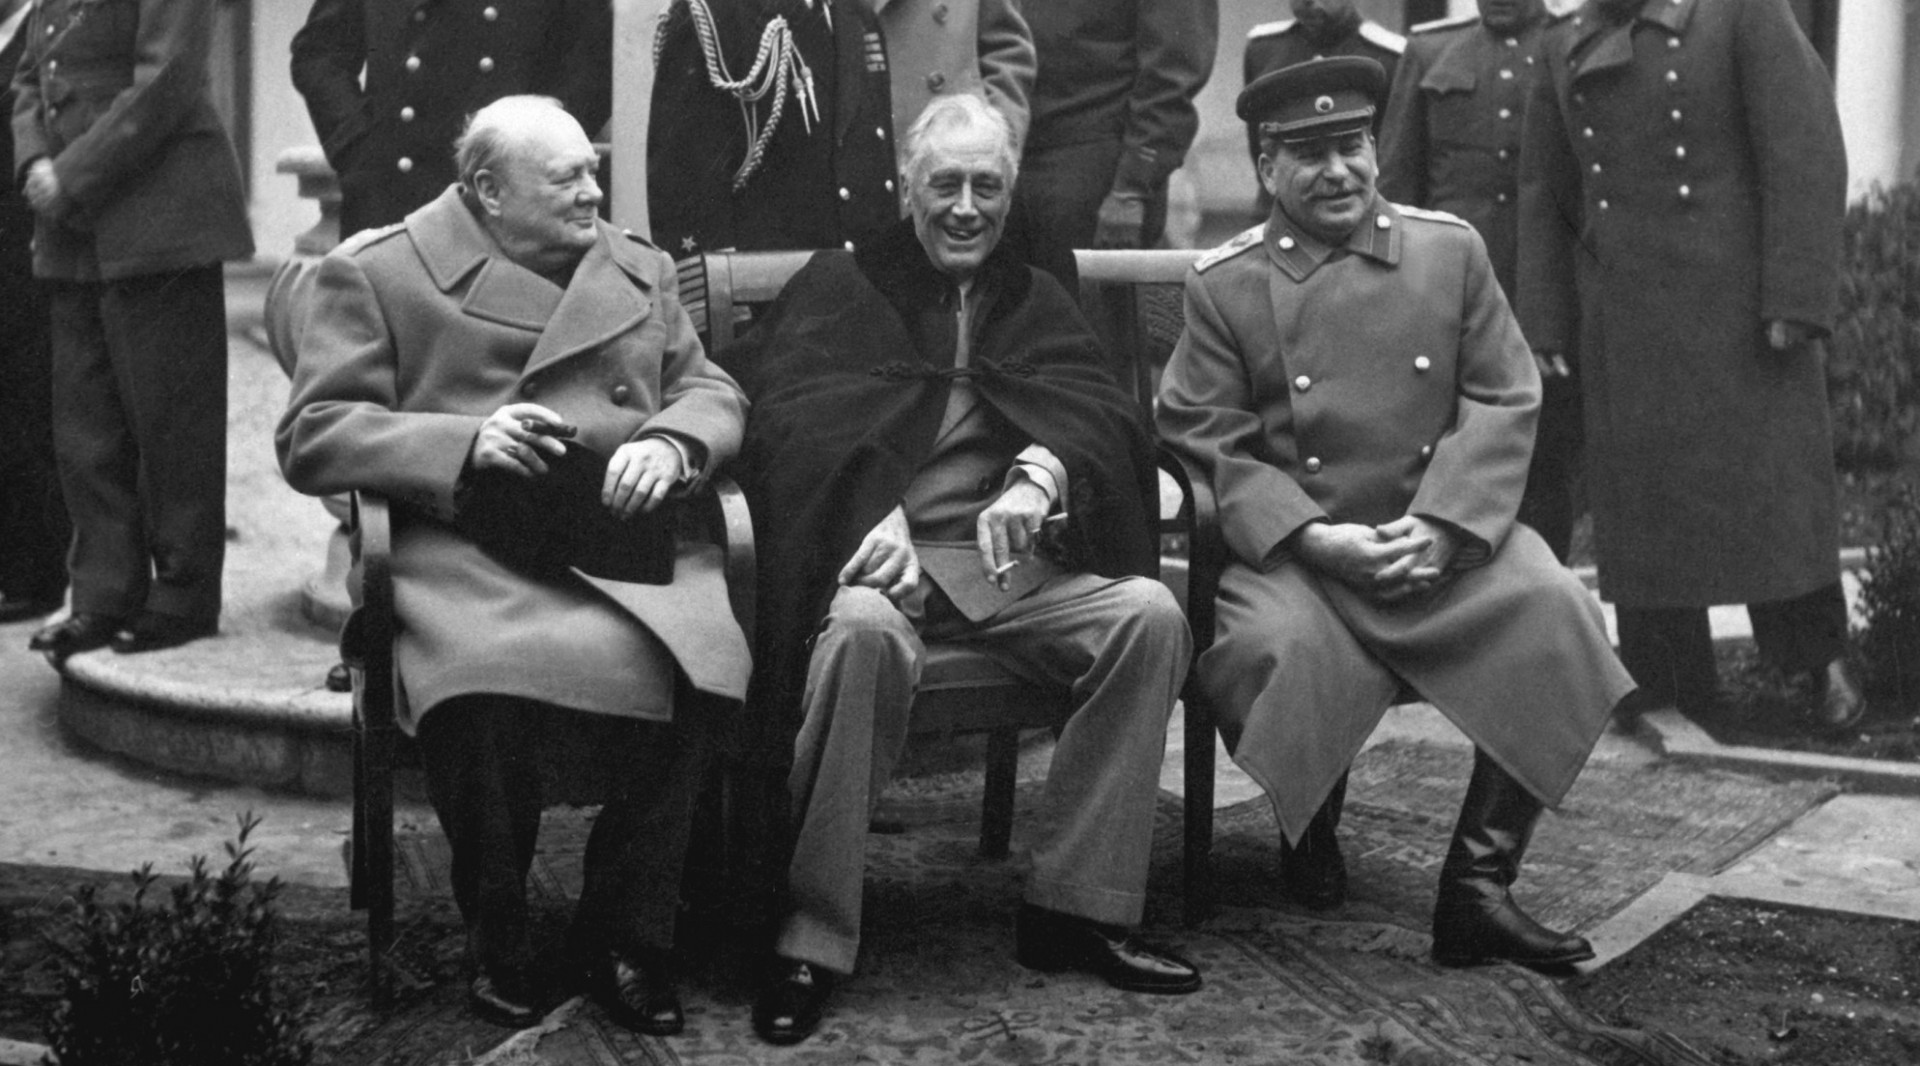 "Big Three" at Yalta in February 1945: Prime Minister Winston Churchill, President Franklin D. Roosevelt, and Premier Josef Stalin. Source: National Archives and Records Administration, Public domain.